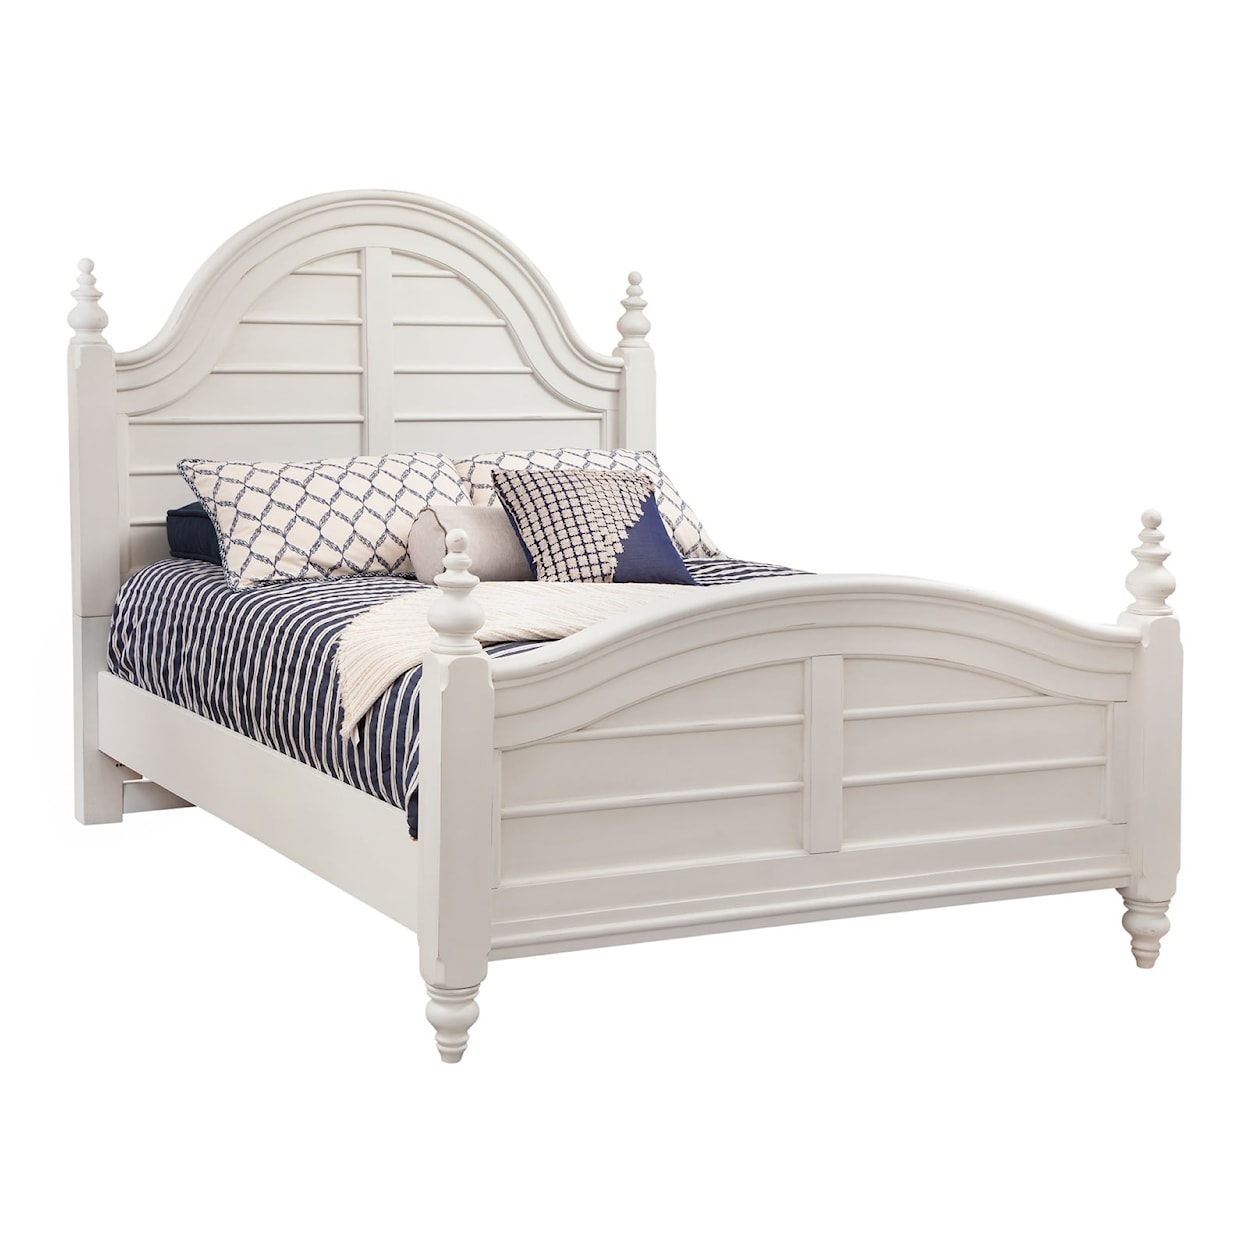 American Woodcrafters Rodanthe King Panel Bed